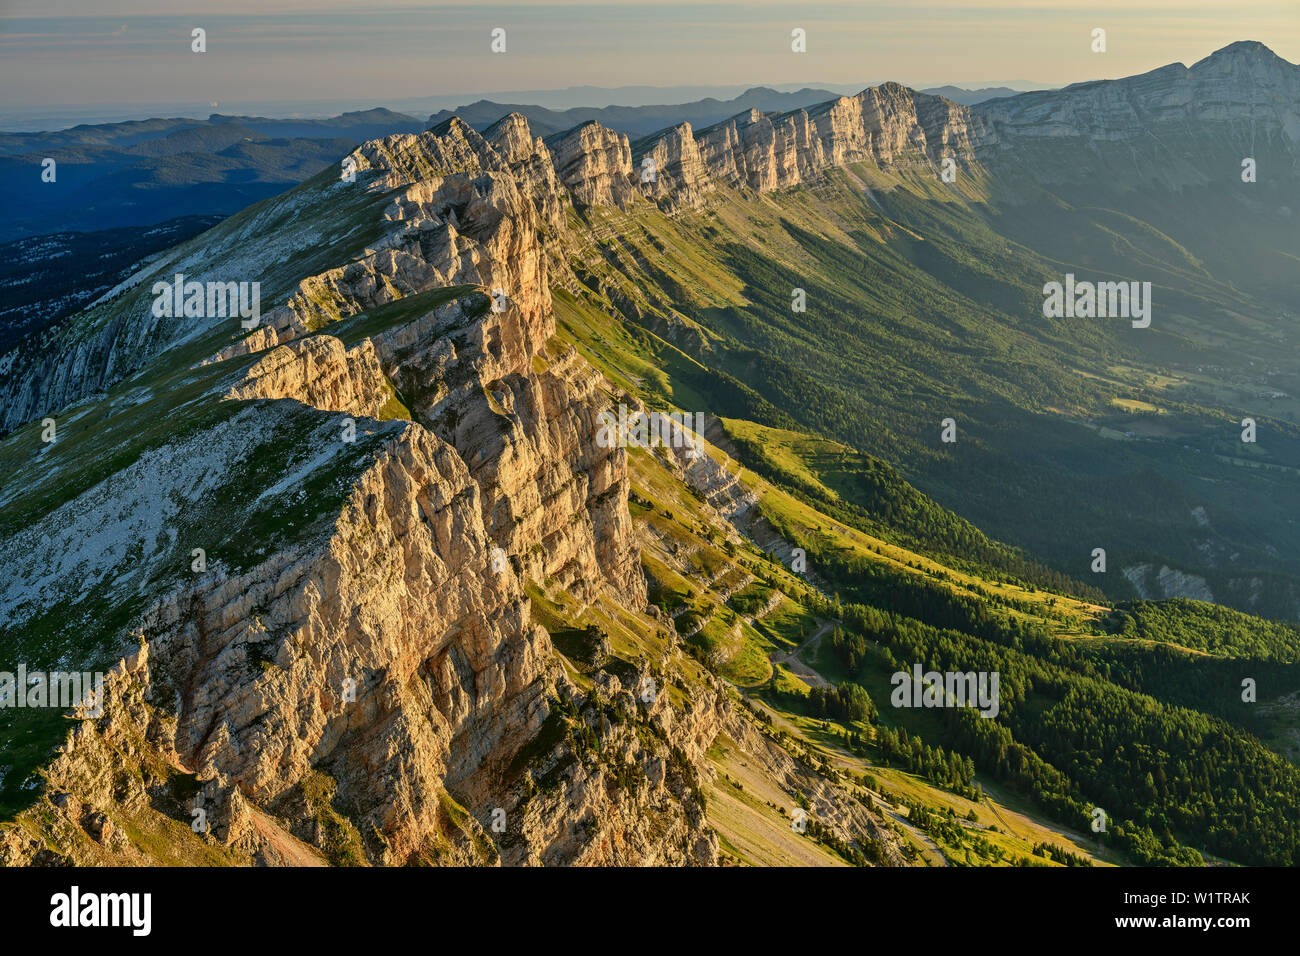 Morning Mood over the mountains of the Vercors with mouche role in the background, from the Grand Veymont, Vercors, Dauphine, Dauphine, Isère, France Stock Photo